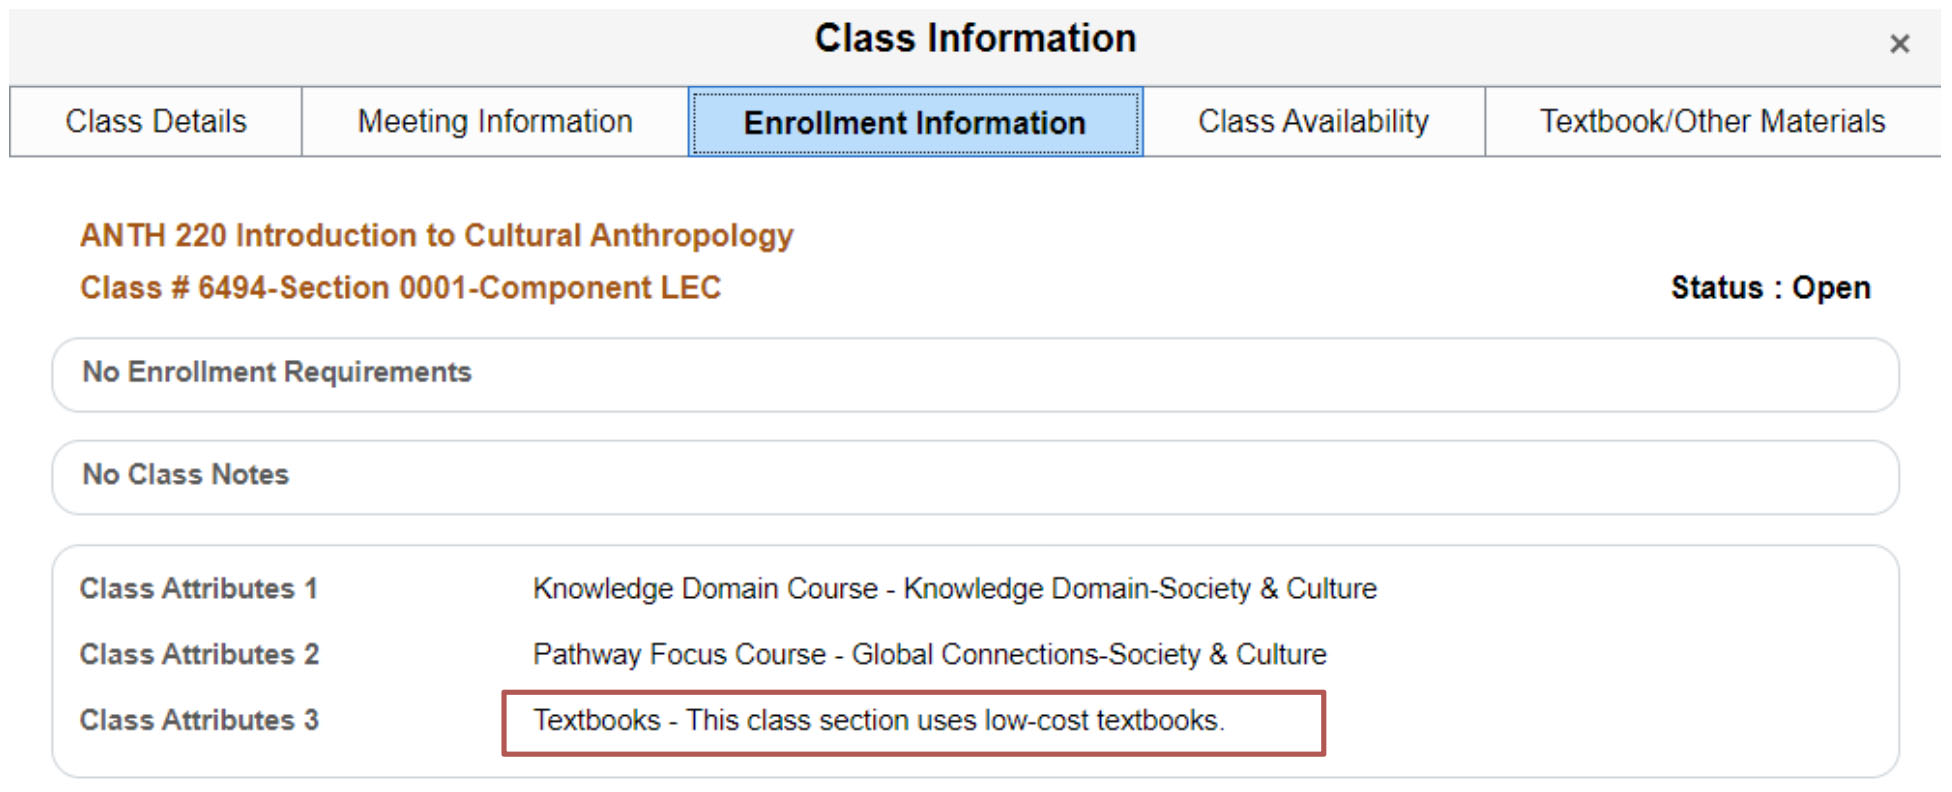 under the Enrollment Information tab, class attributes, including textbooks, are available